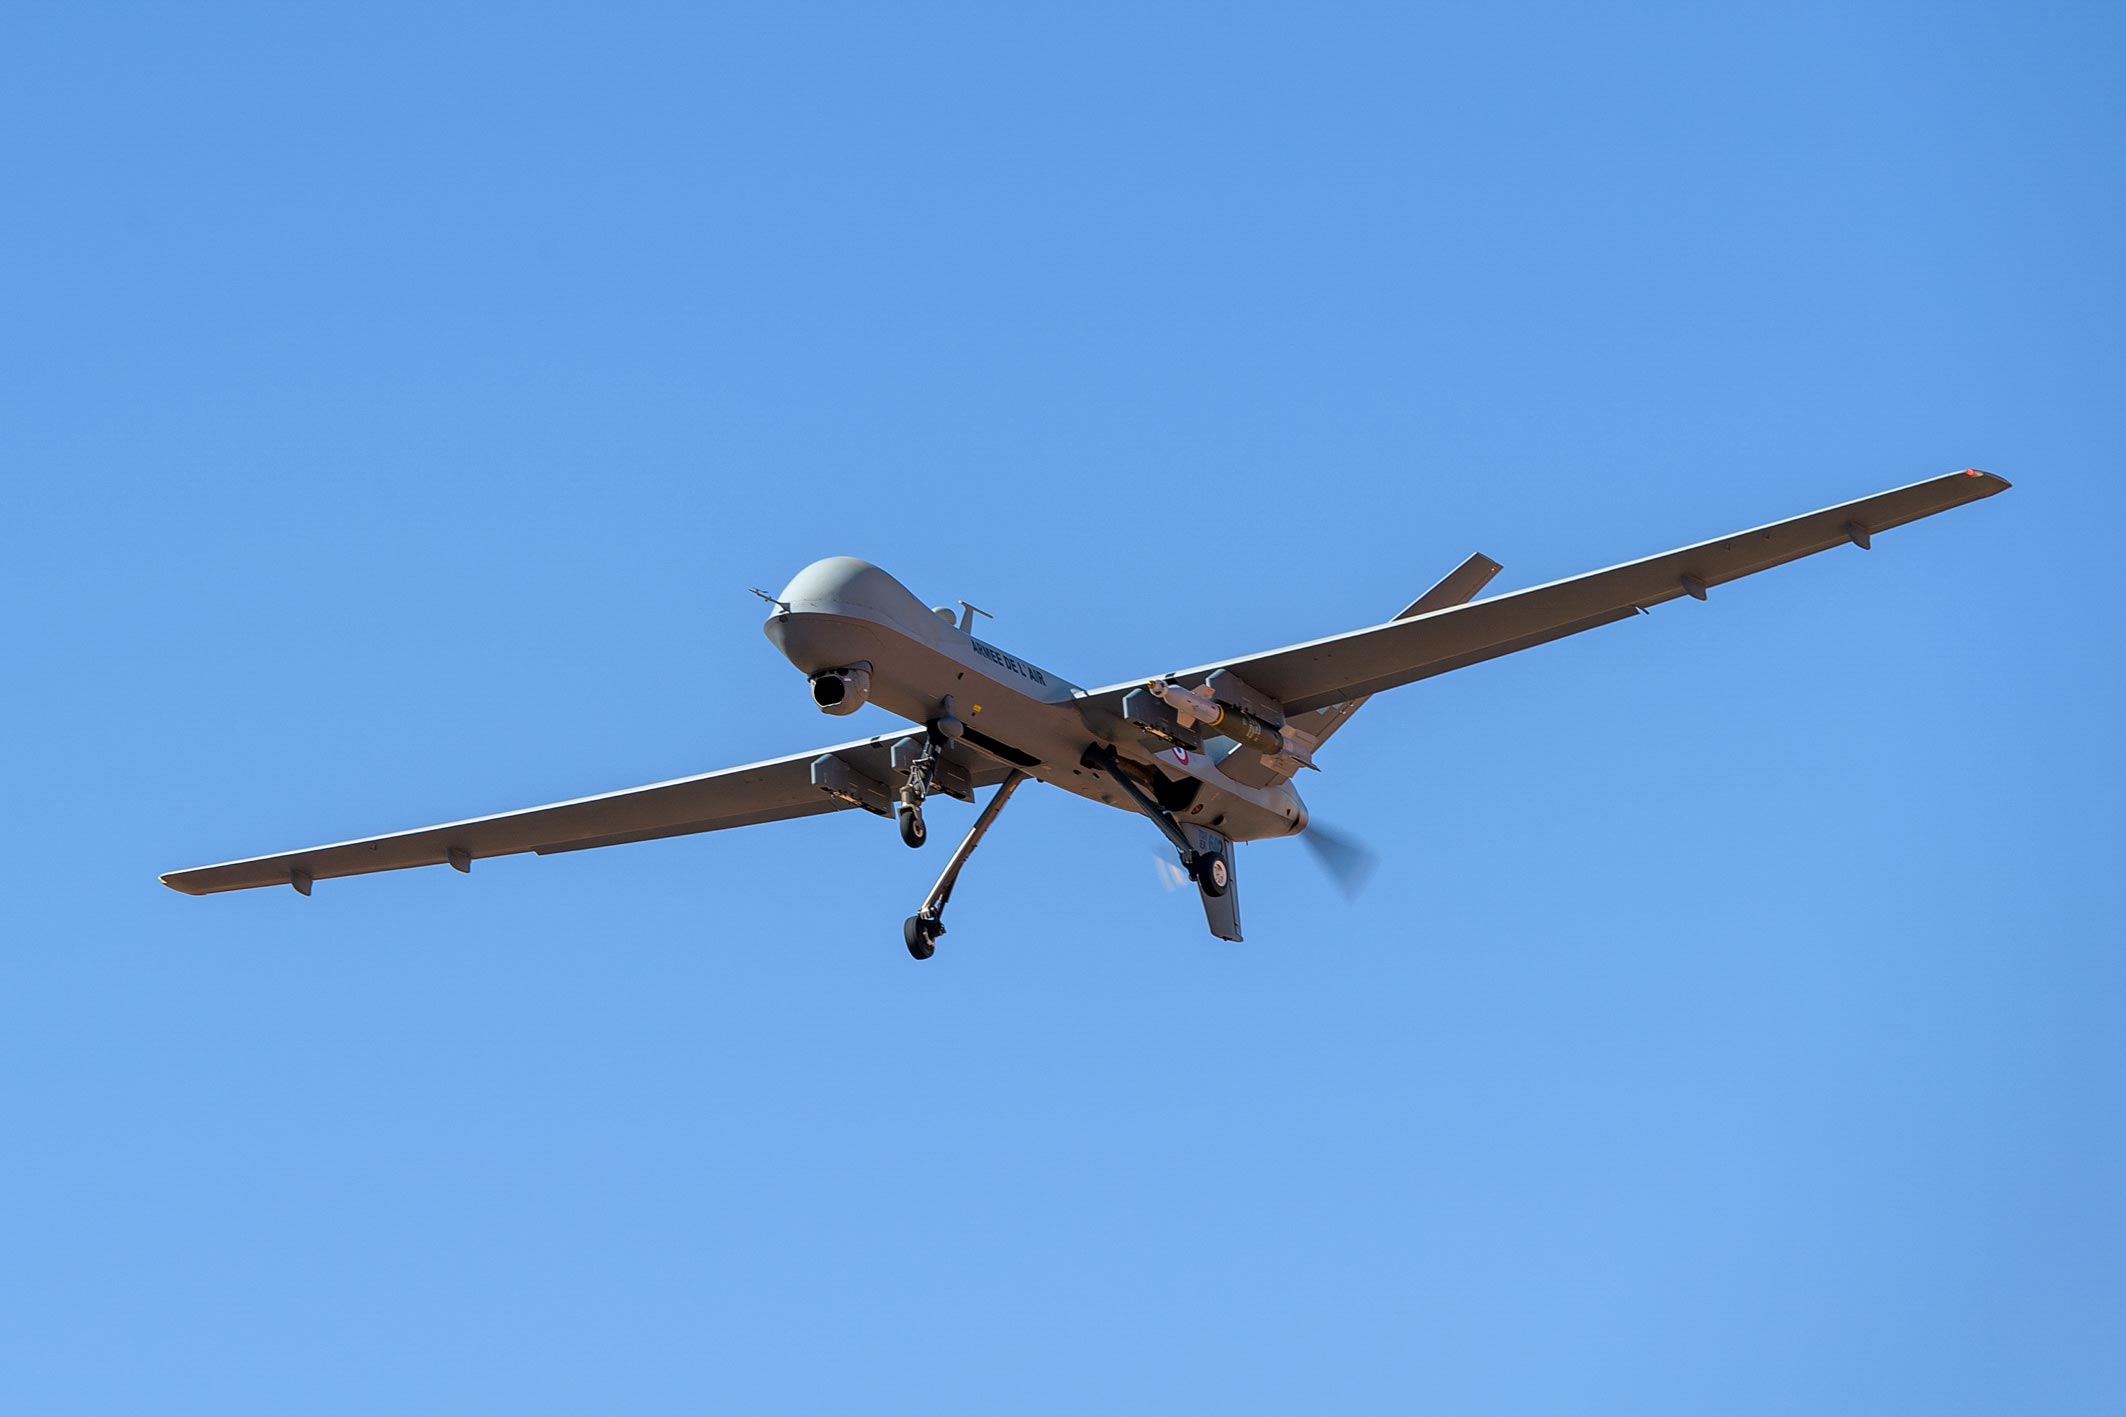 Armed Reaper drones support Operation Barkhane